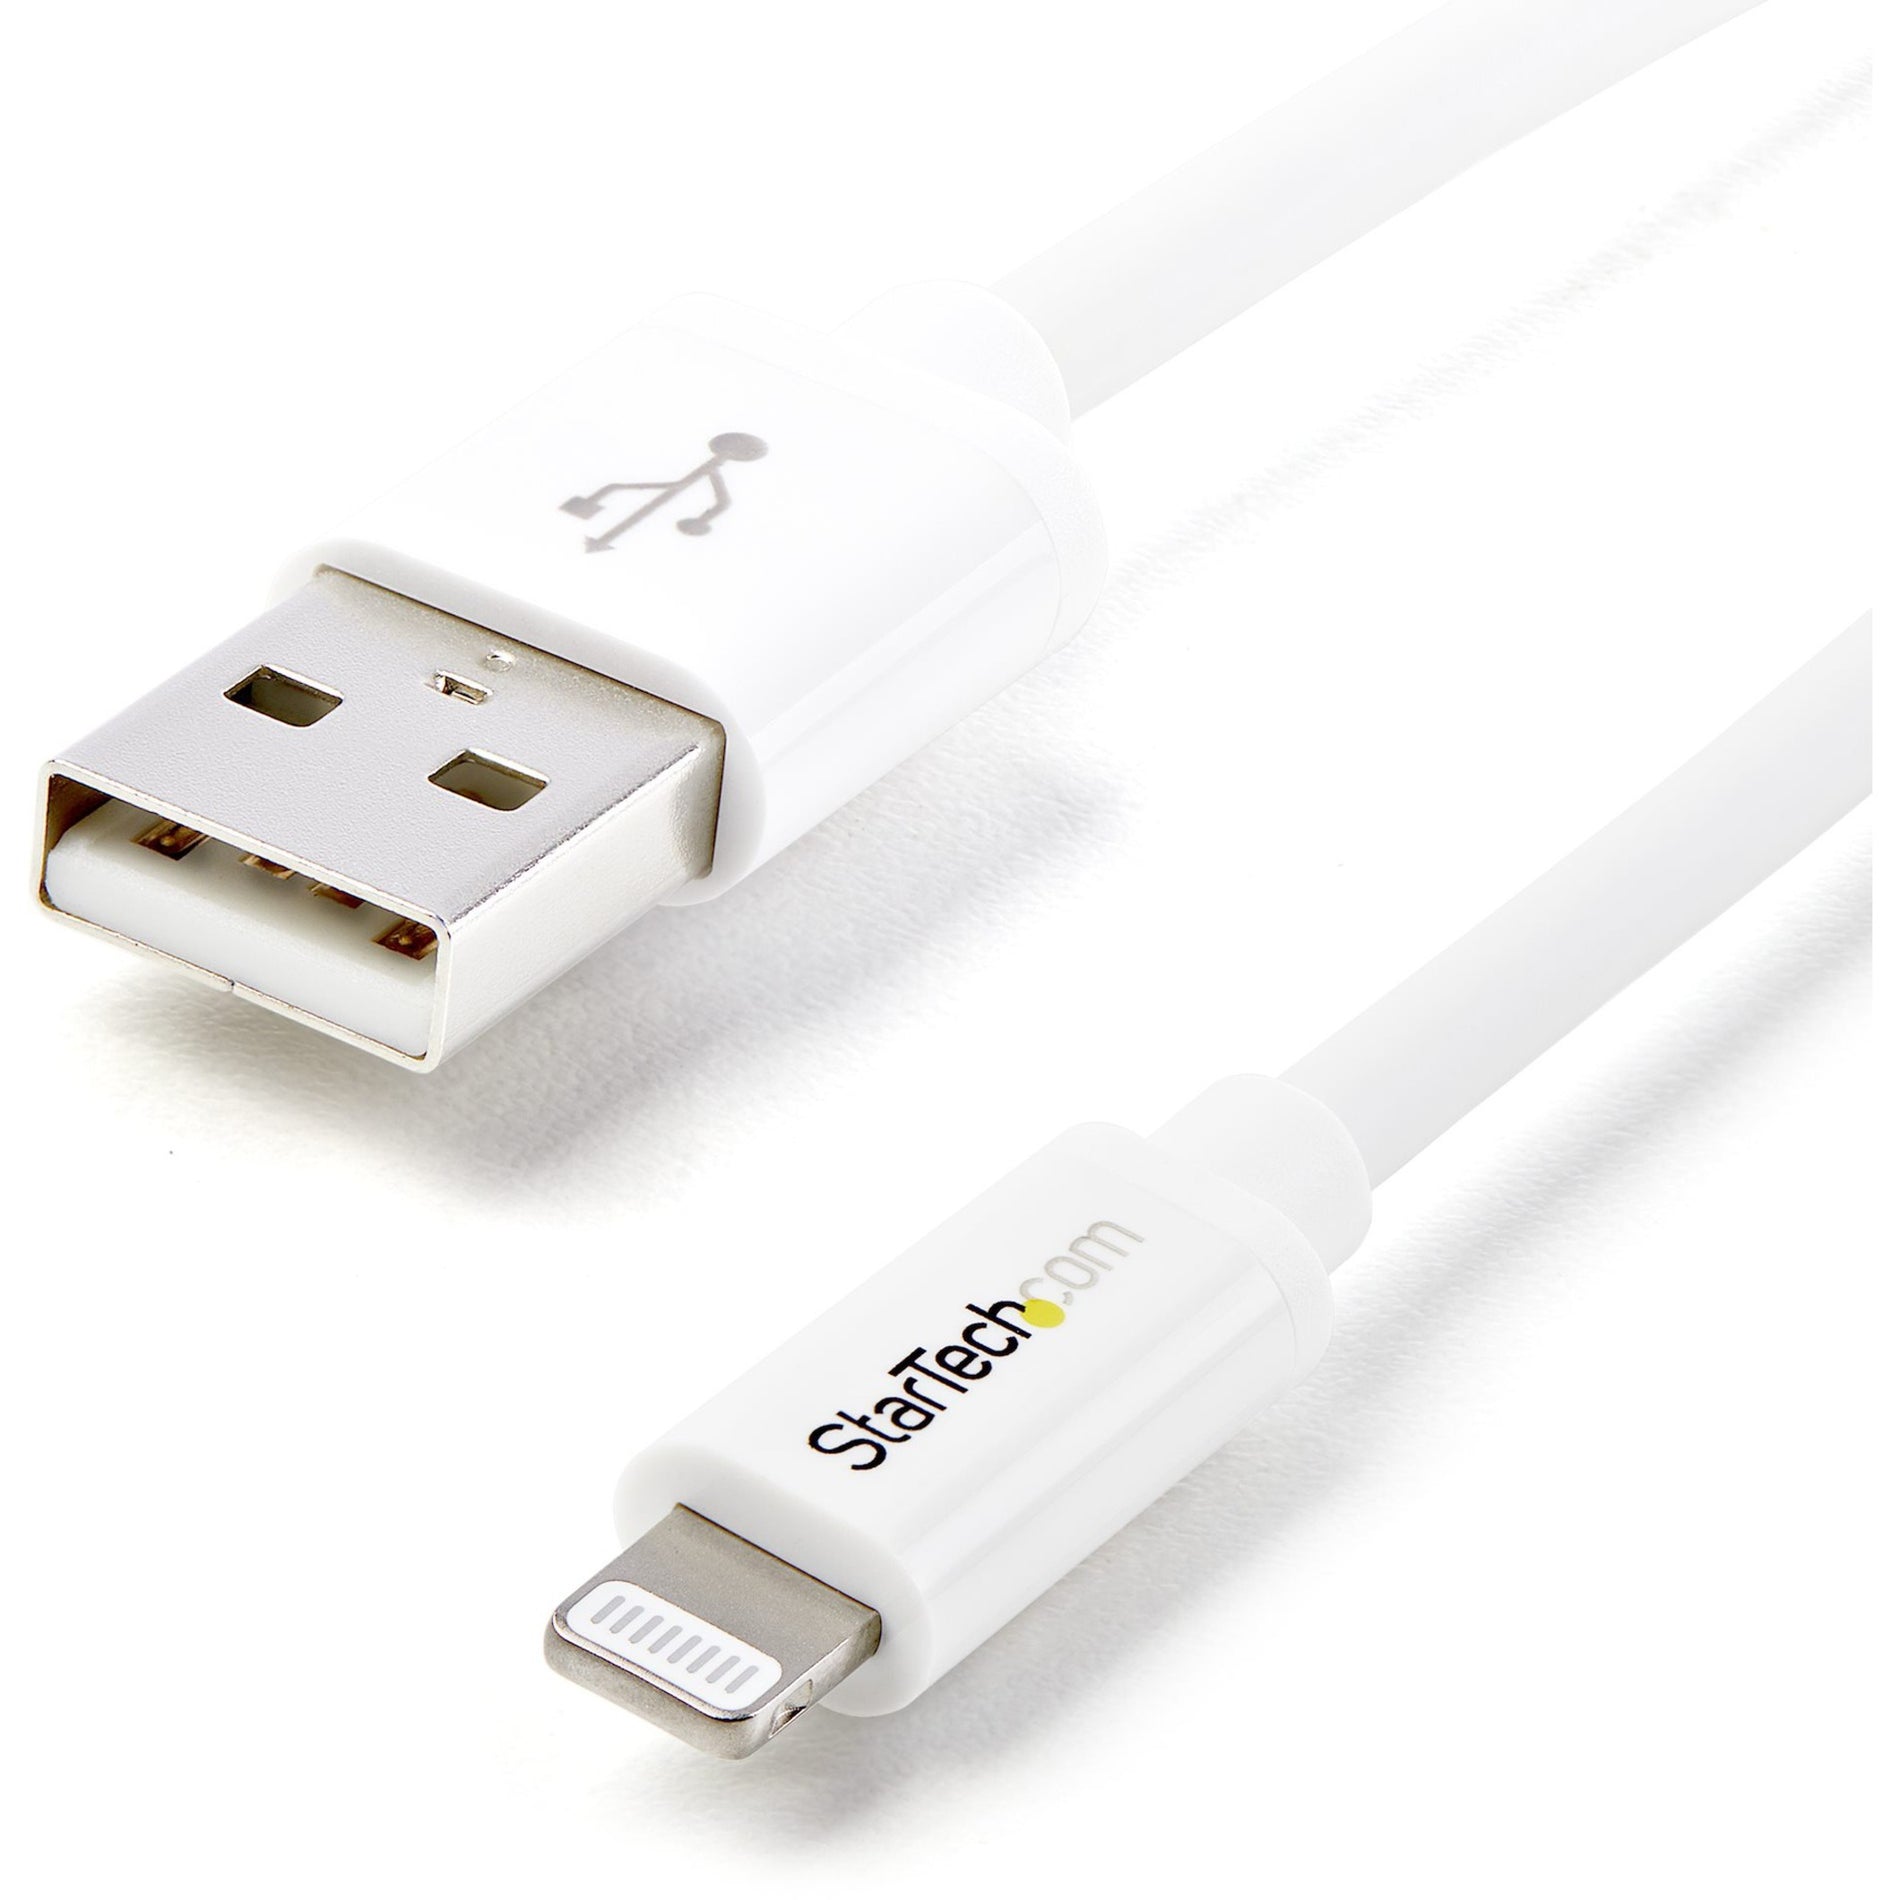 StarTech.com USBLT1MW Sync/Charge Lightning/USB Data Transfer Cable, 3ft, White